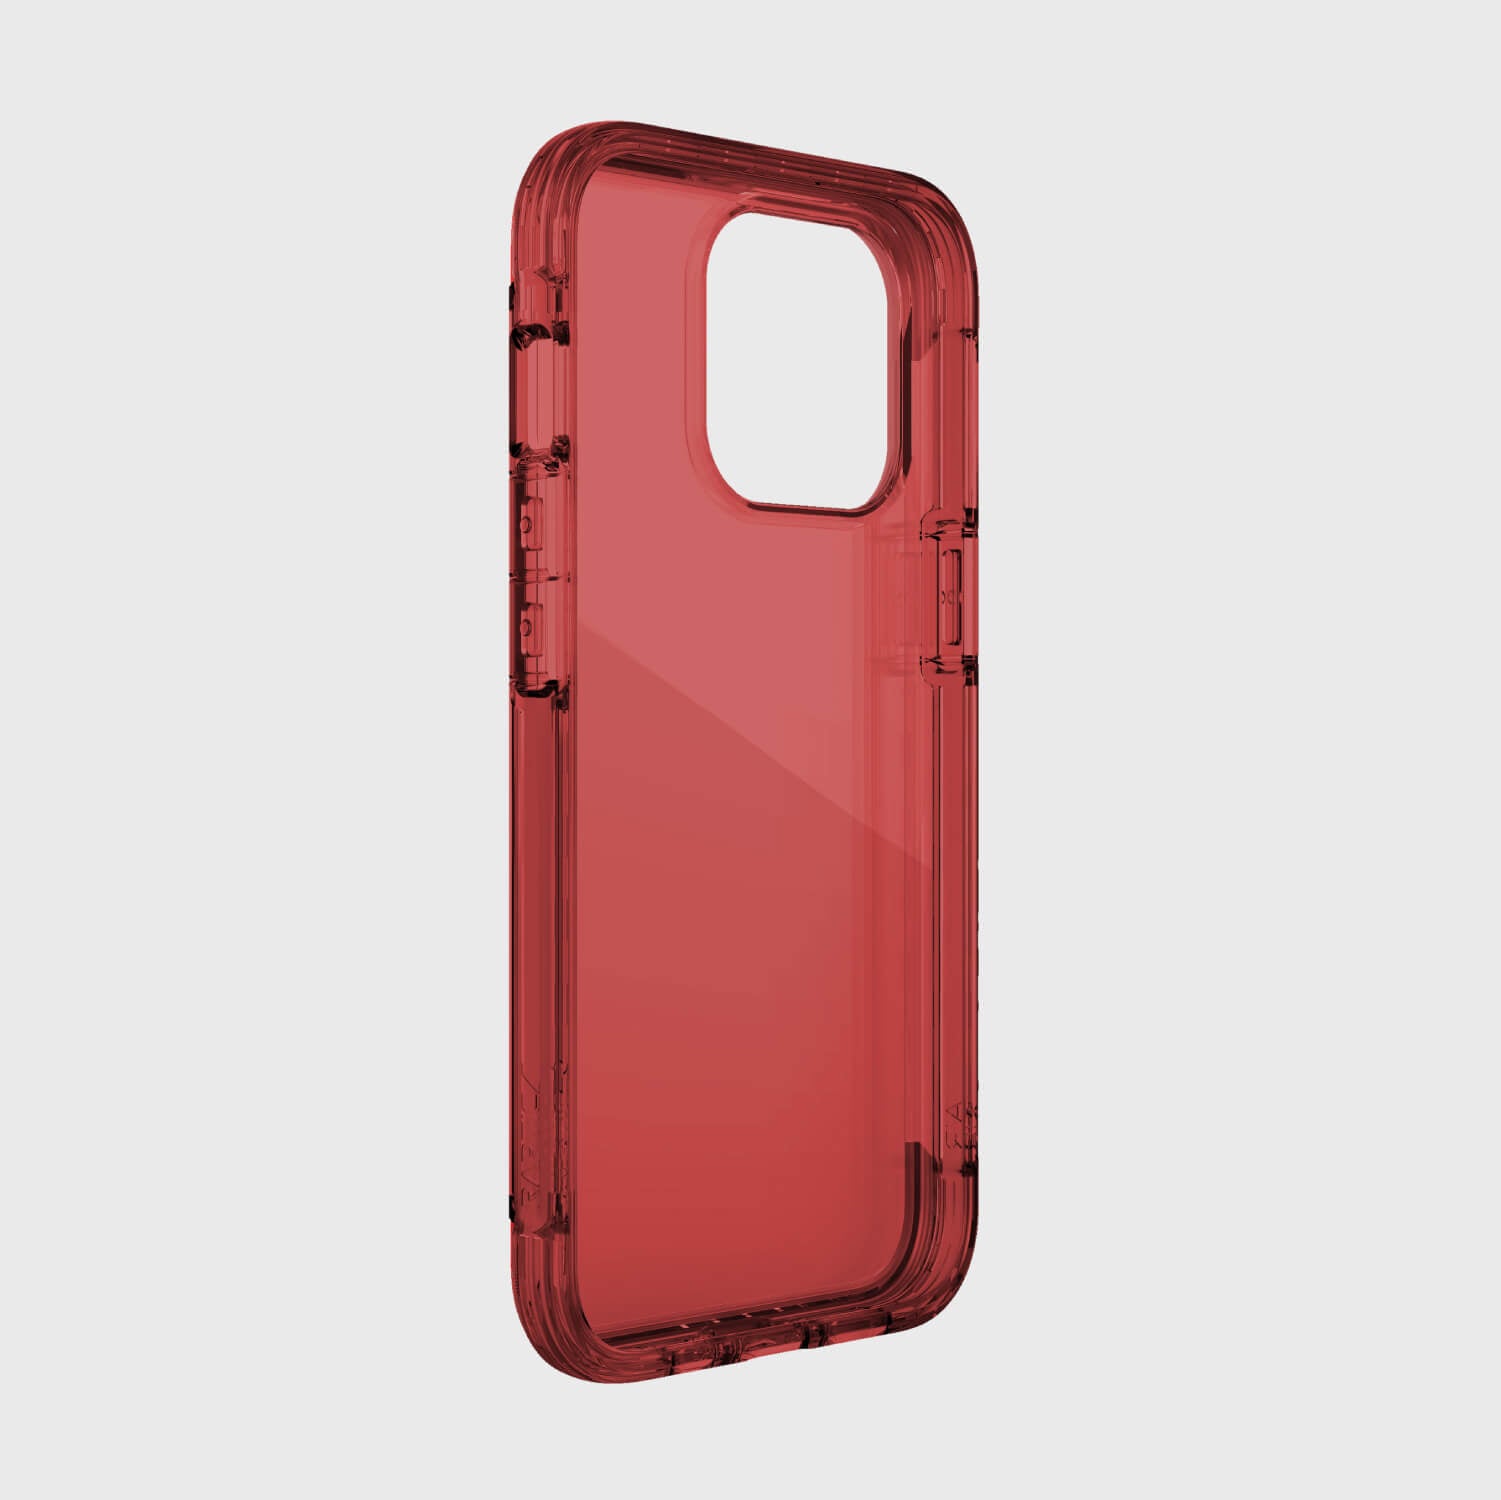 A red Raptic iPhone 13 Pro Max Case - AIR with 13 foot drop protection on a white background.